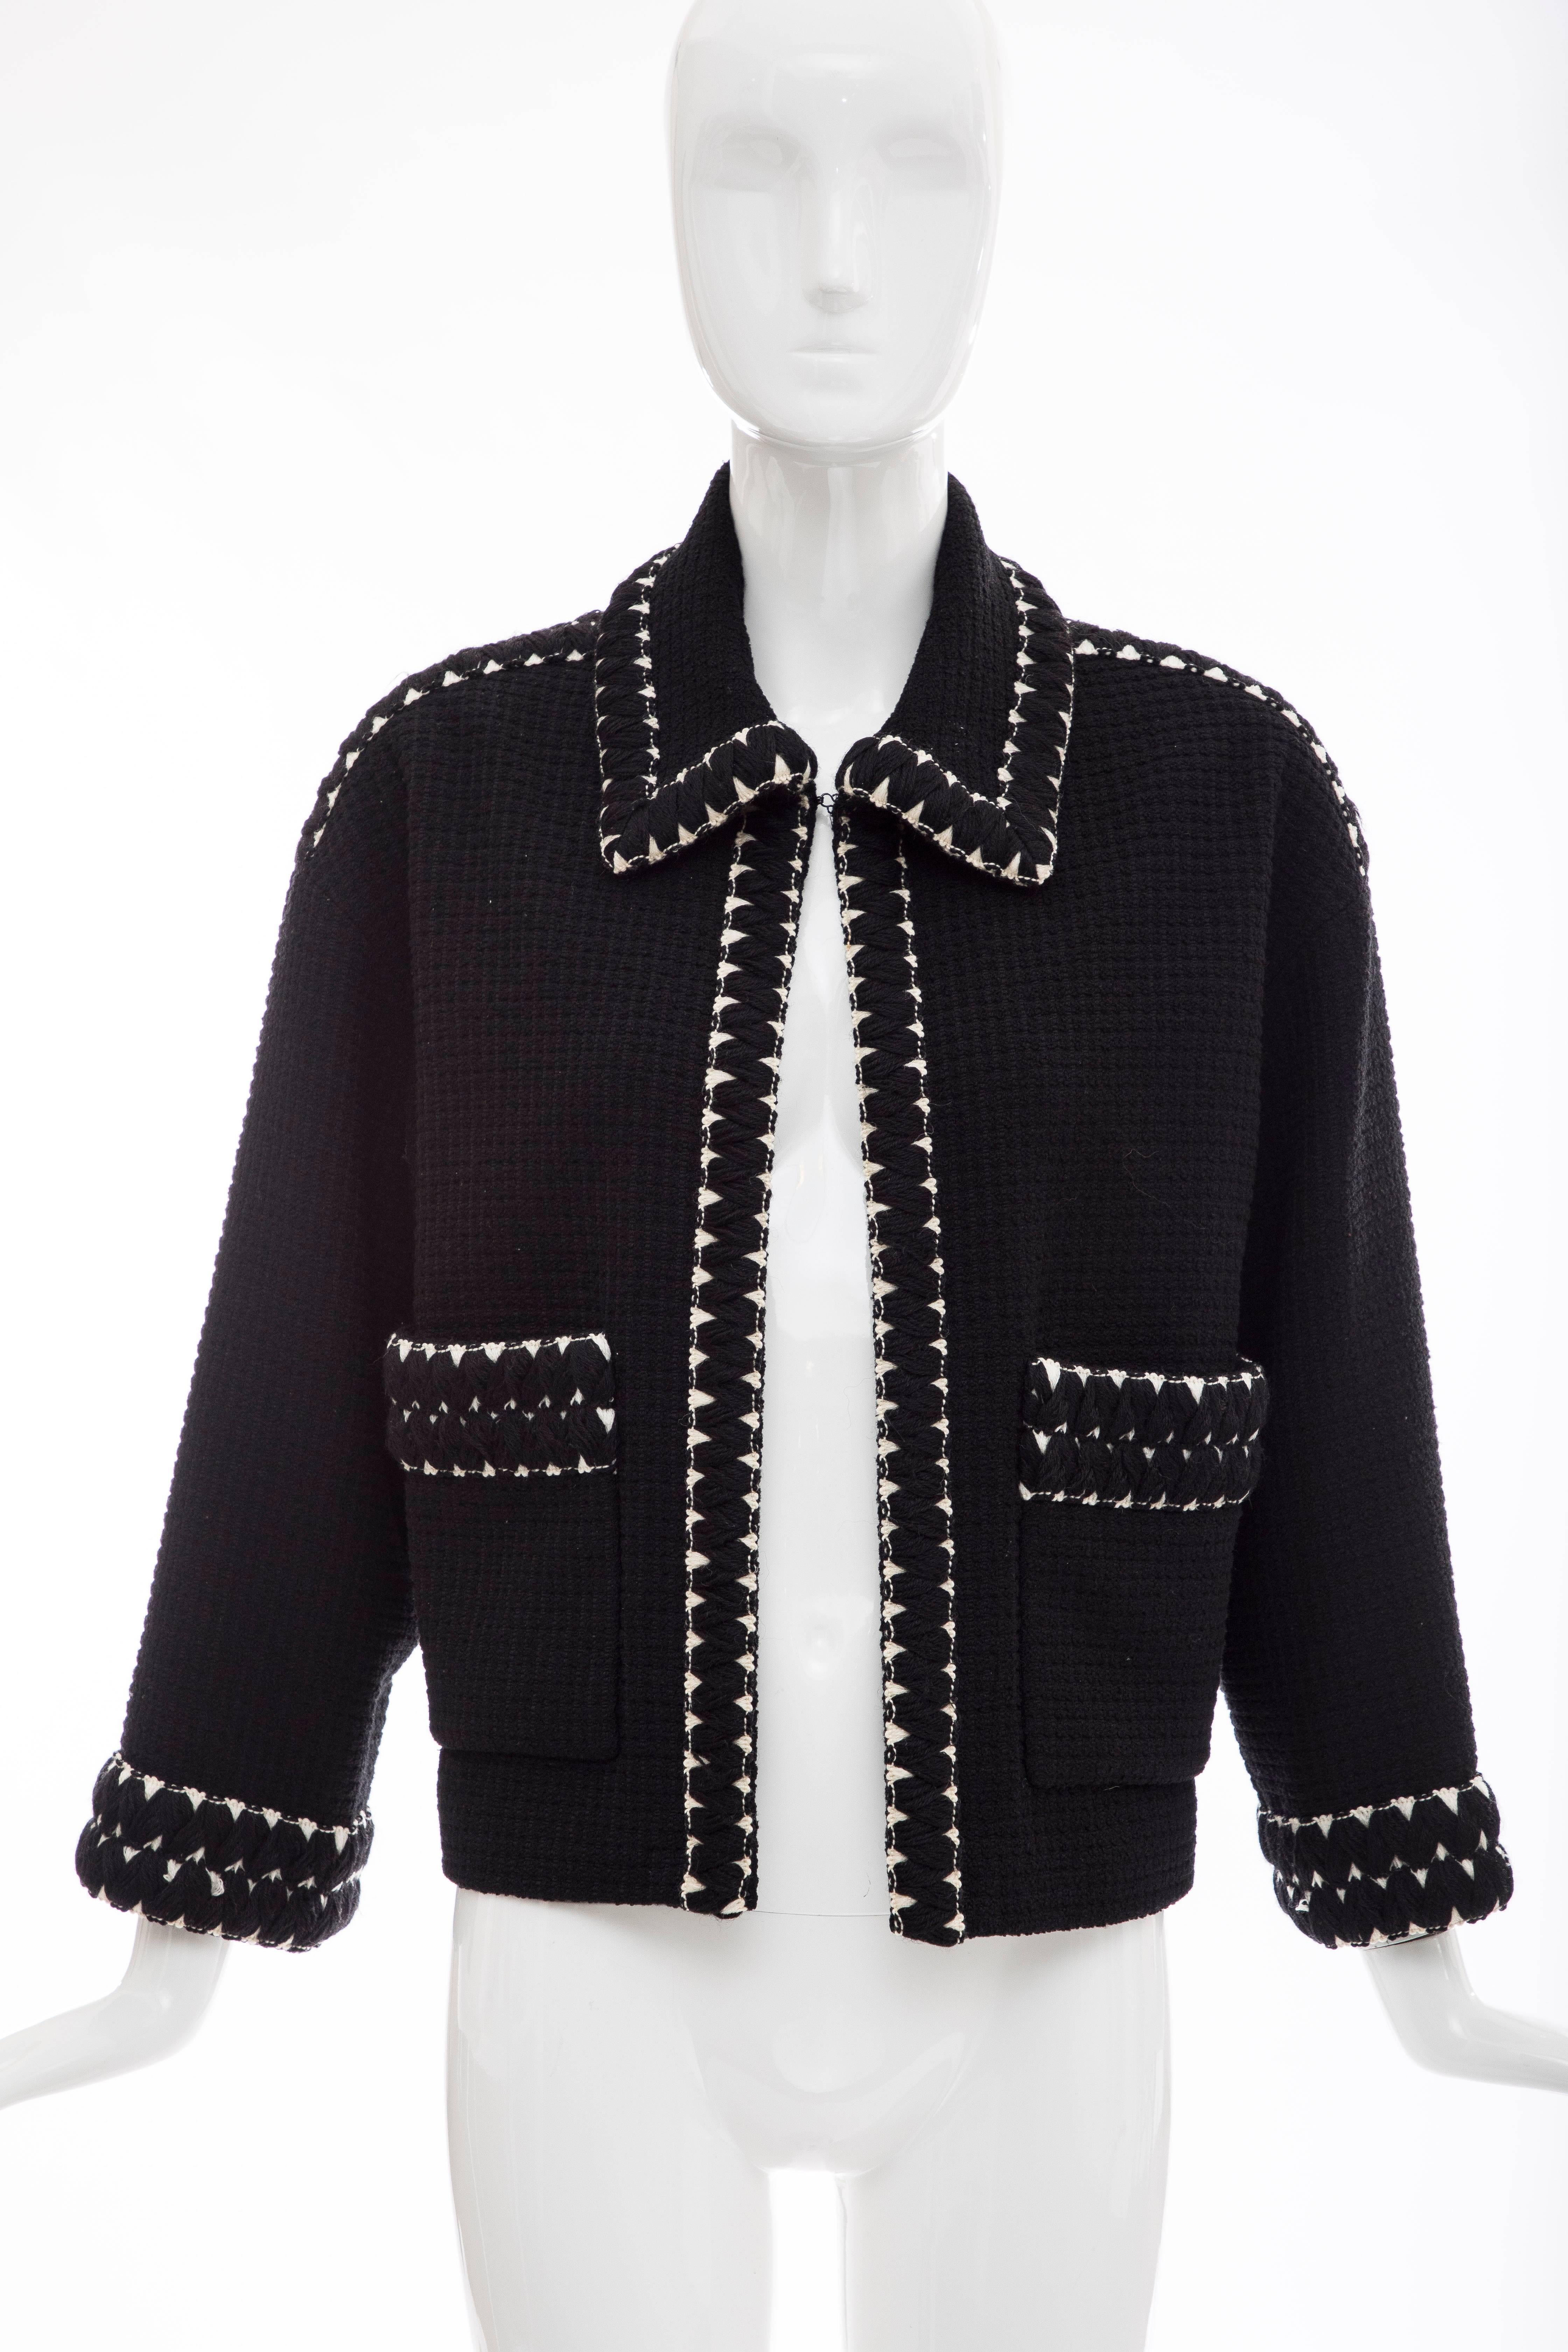 Chanel, Circa 1980's black tweed jacket featuring embroidered trim throughout, pointed collar, three-quarter sleeves, dual patch pockets, single hook closure at front and printed silk lining. 

No Size Label
Bust: 42, Waist 44, Shoulder 21, Length